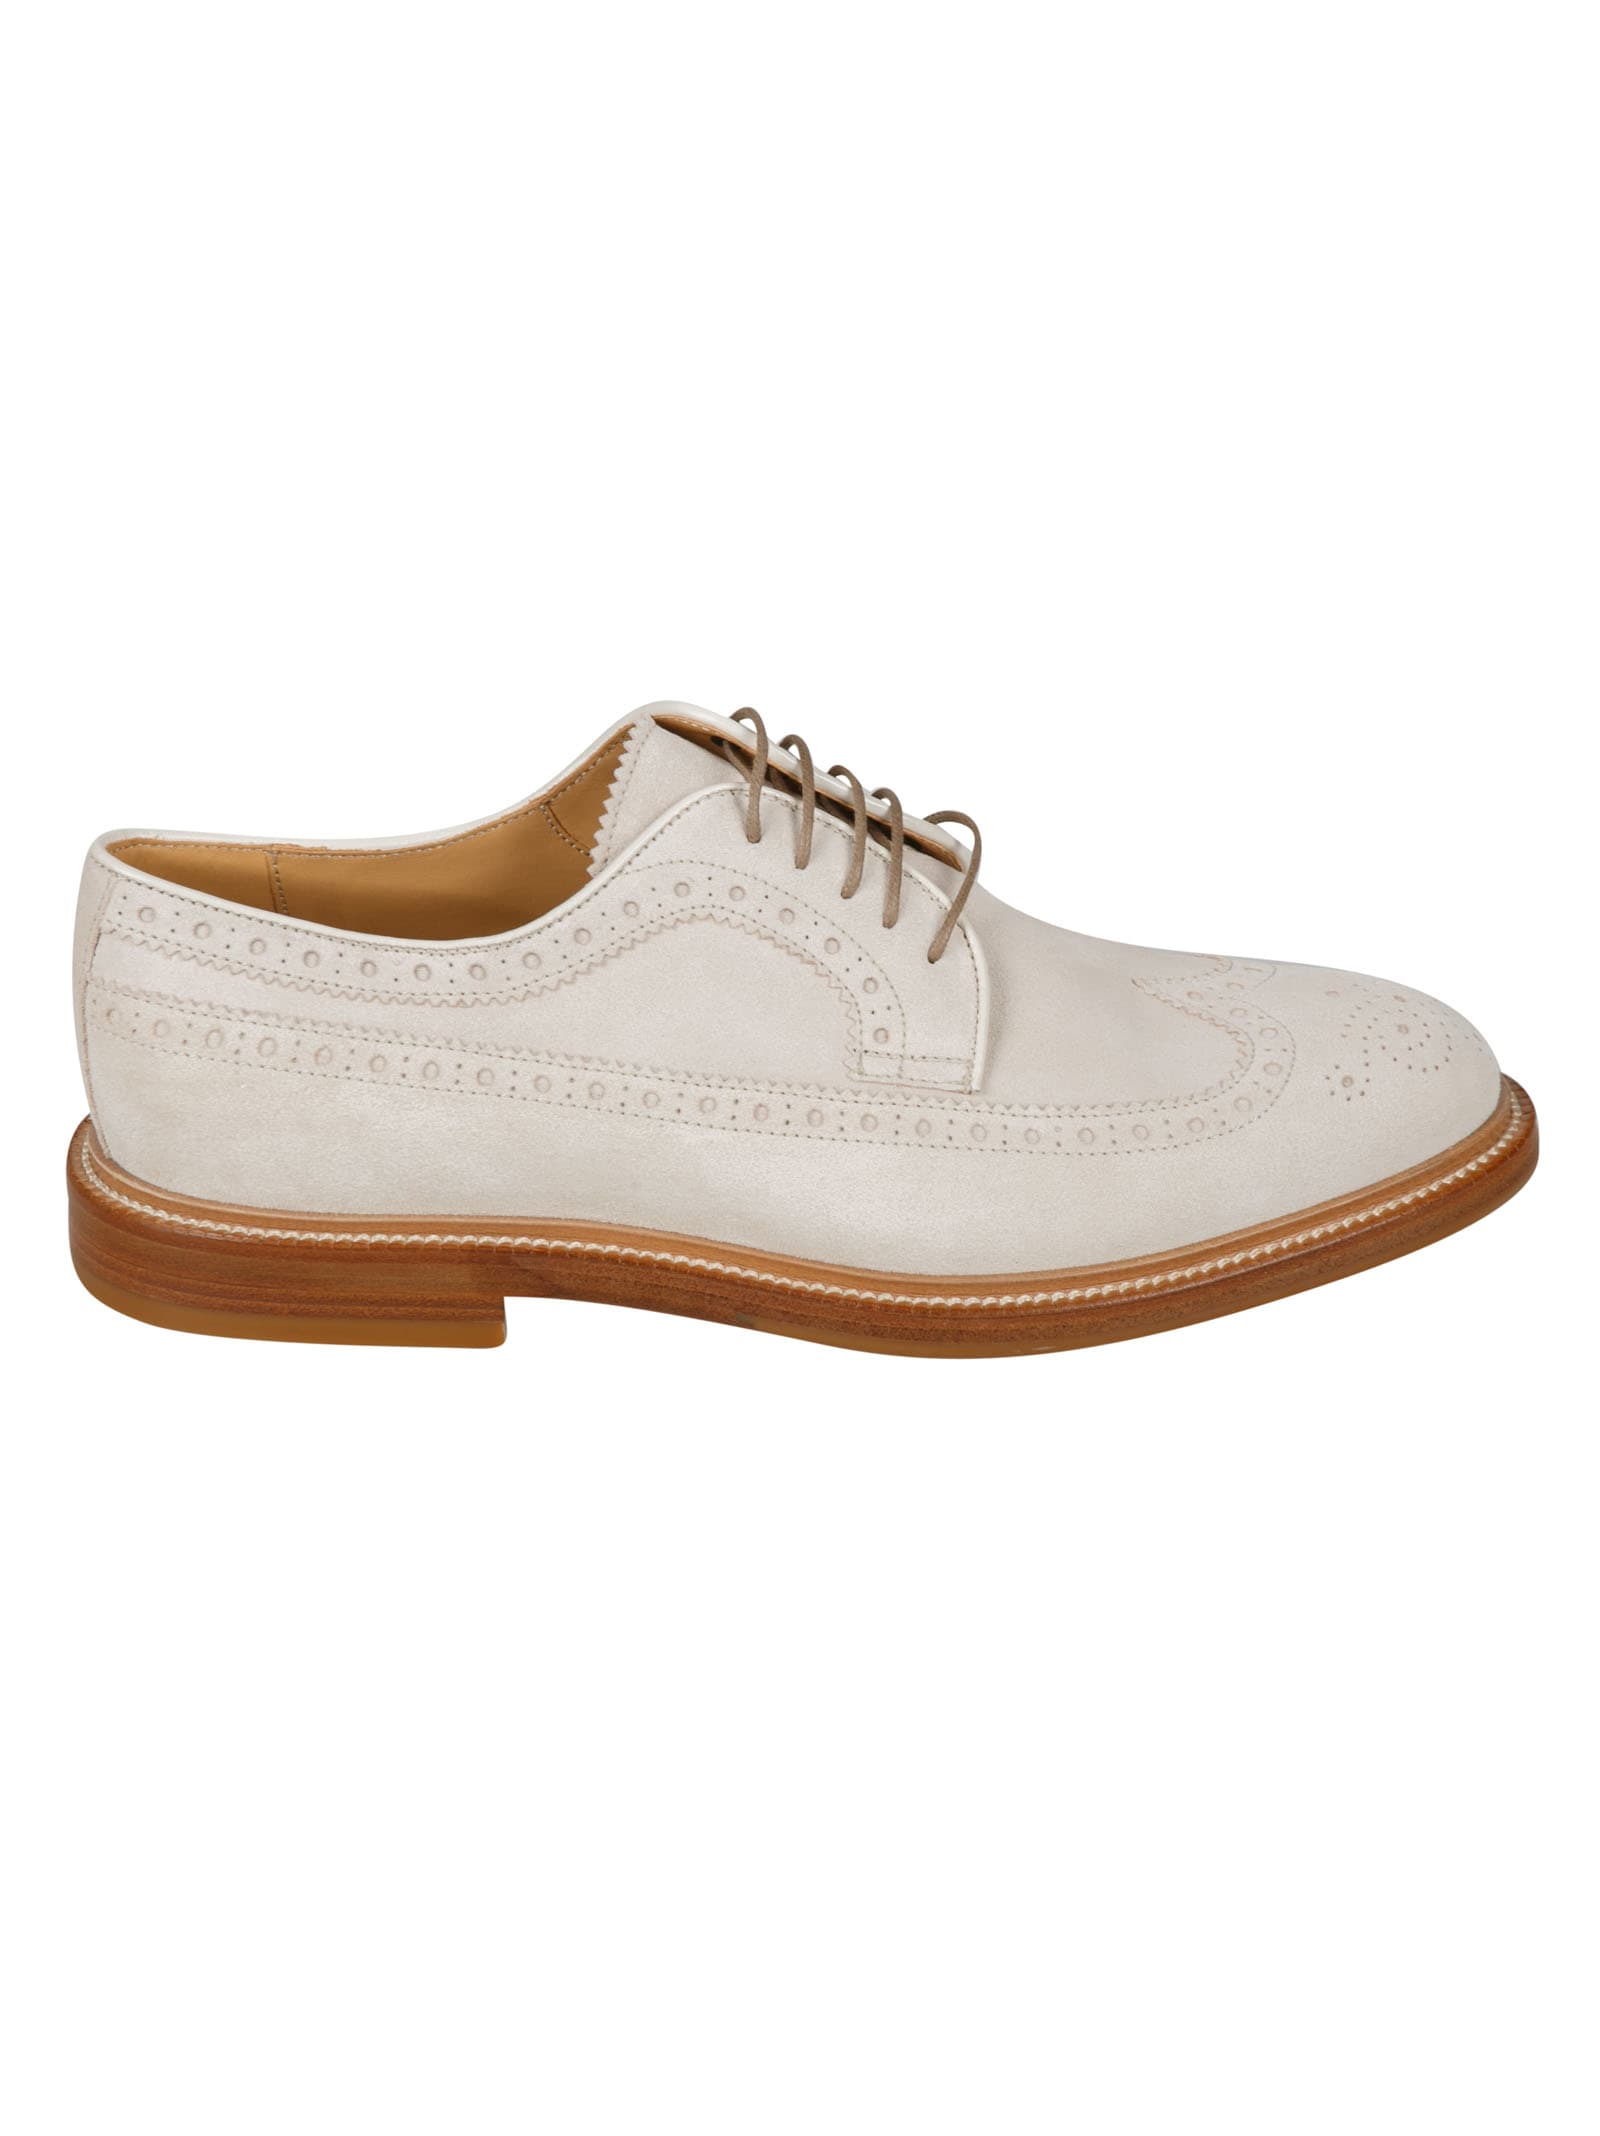 Brunello Cucinelli Embossed Oxford Shoes